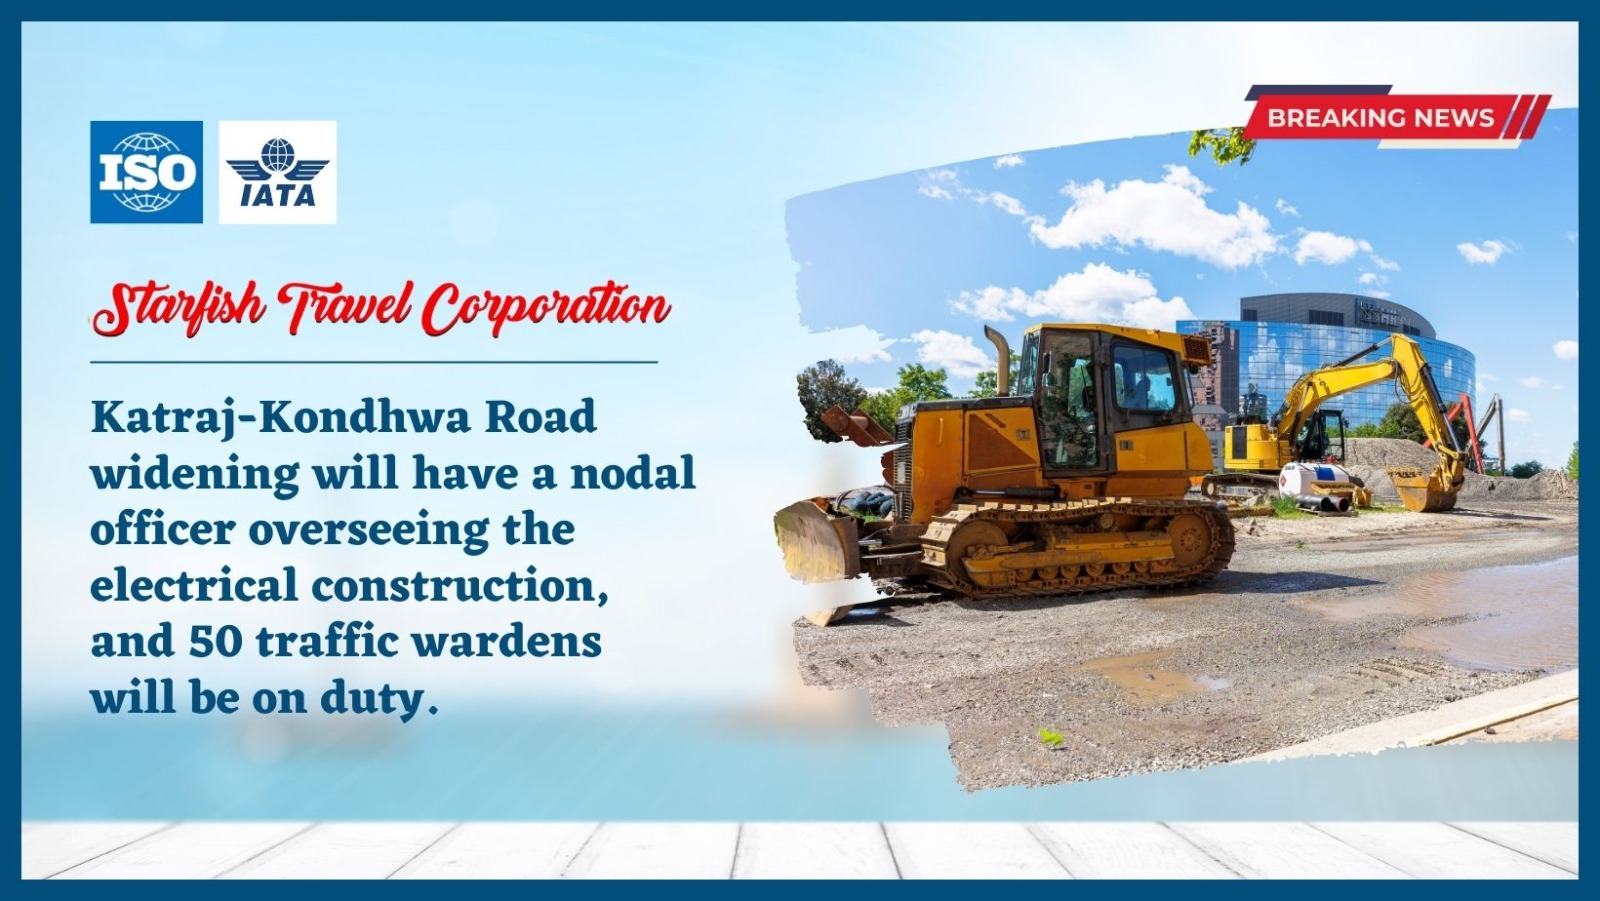 You are currently viewing Katraj-Kondhwa Road widening will have a nodal officer overseeing the electrical construction, and 50 traffic wardens will be on duty.